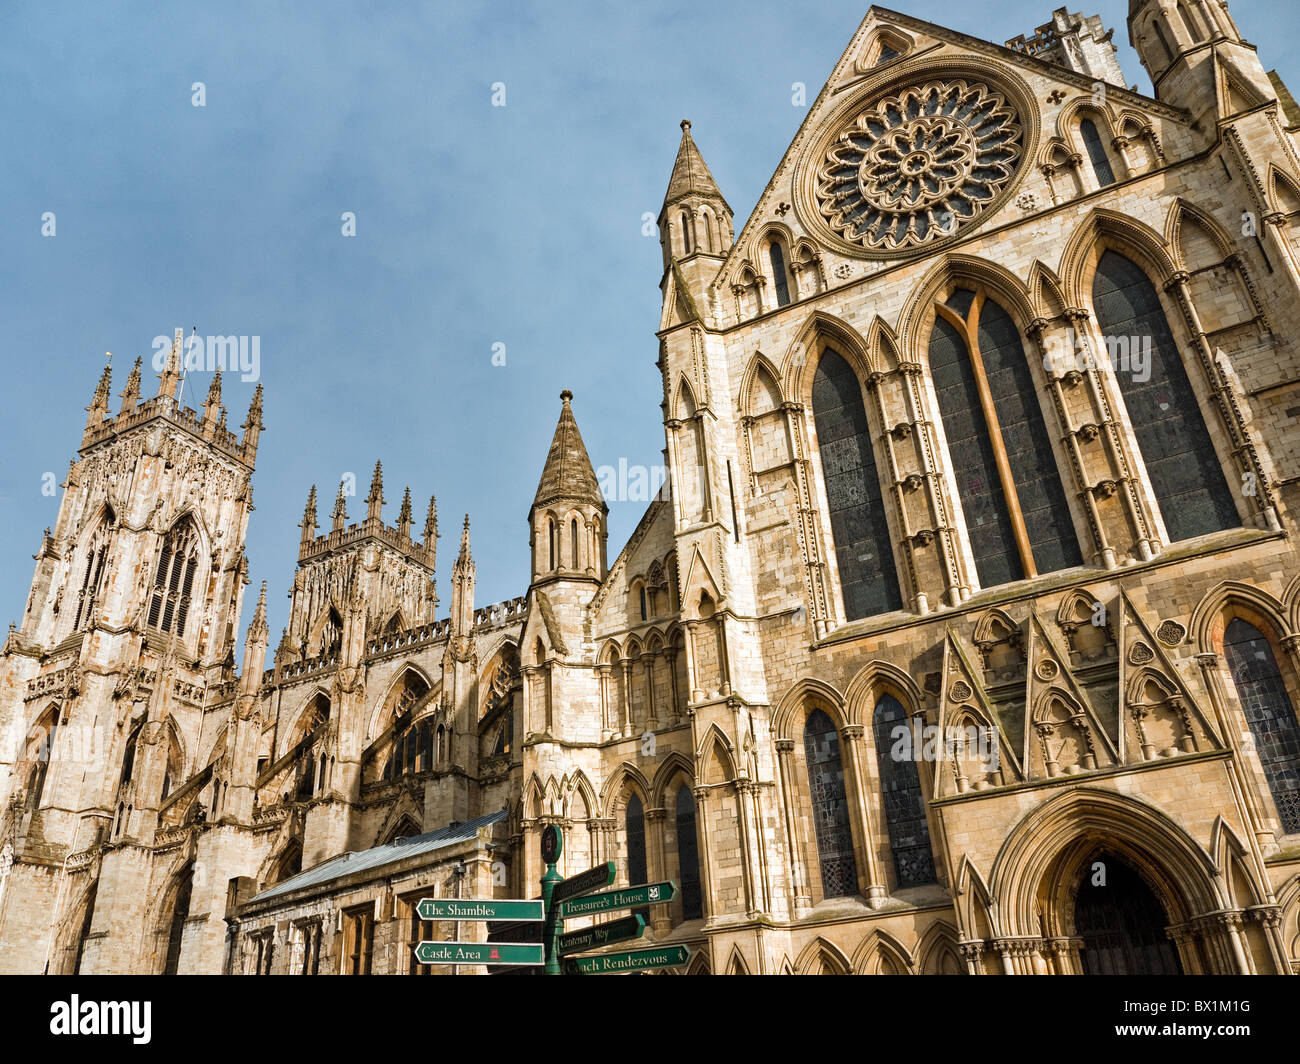 York Minster showing the entrance at the end of the South transept with rose window and signpost, City of York, Yorkshire, UK Stock Photo